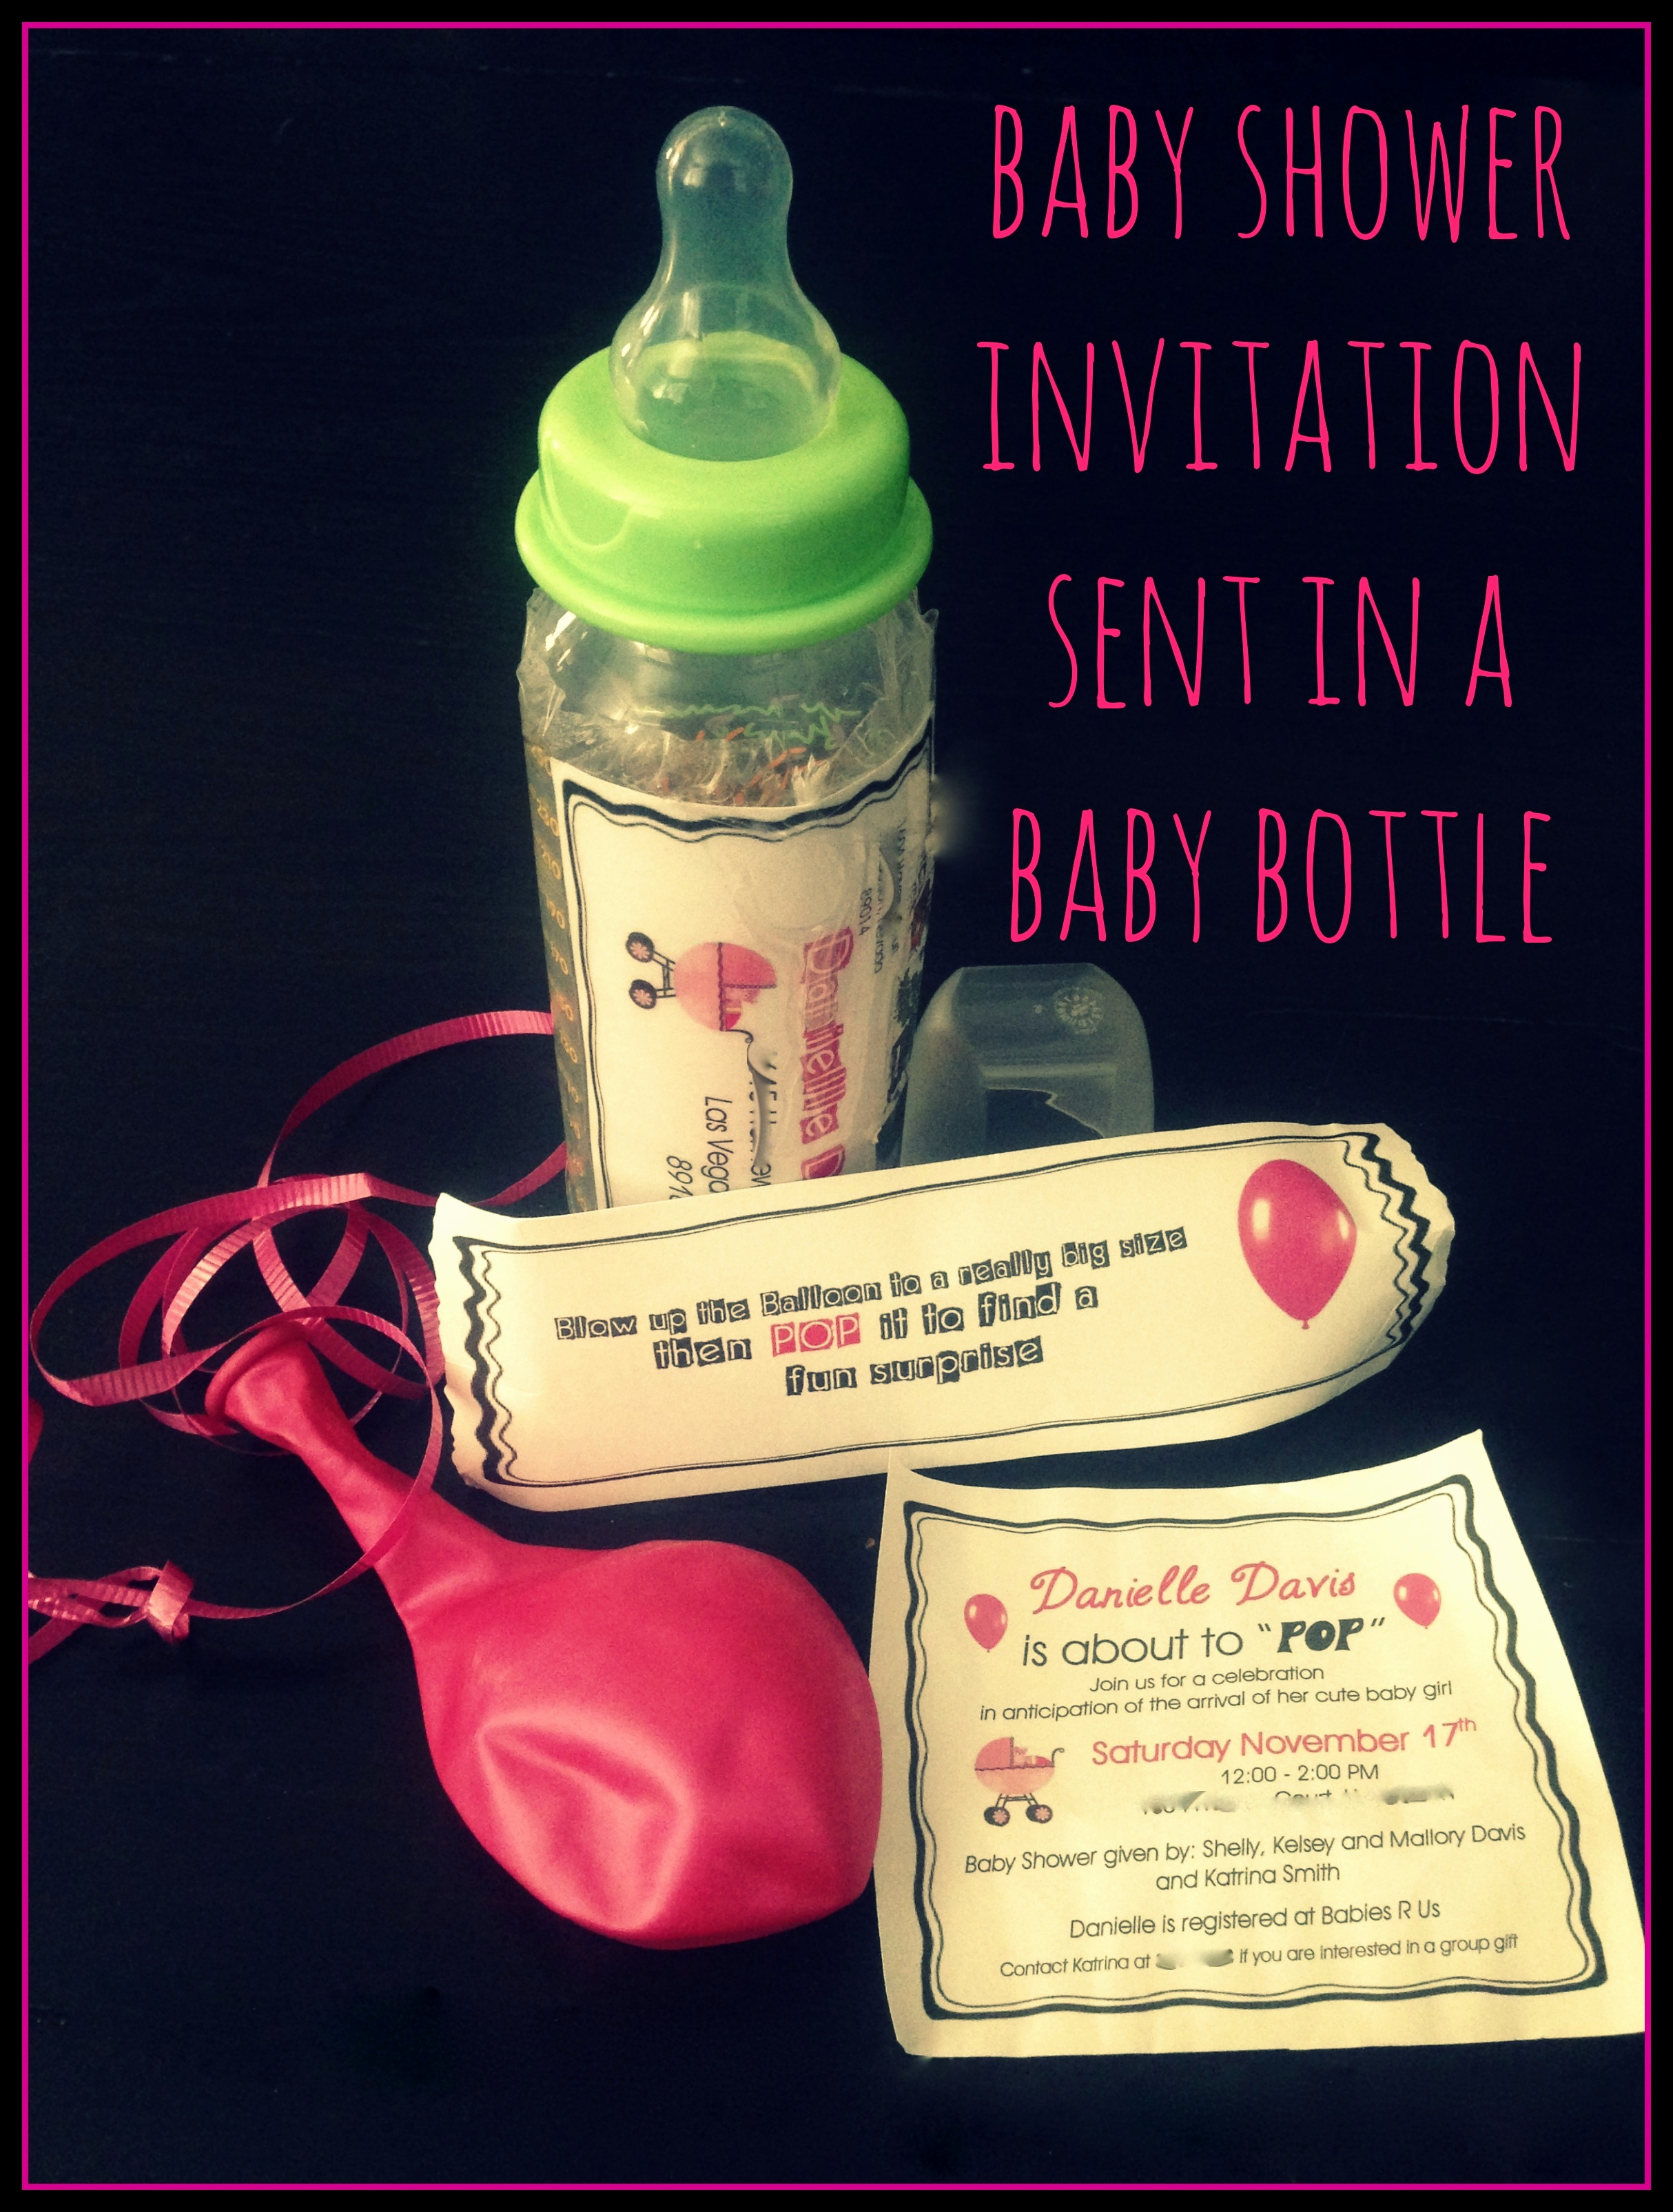 Invitation In A Bottle Inspirational 4 Simple Steps for A Successful Baby Shower today S the